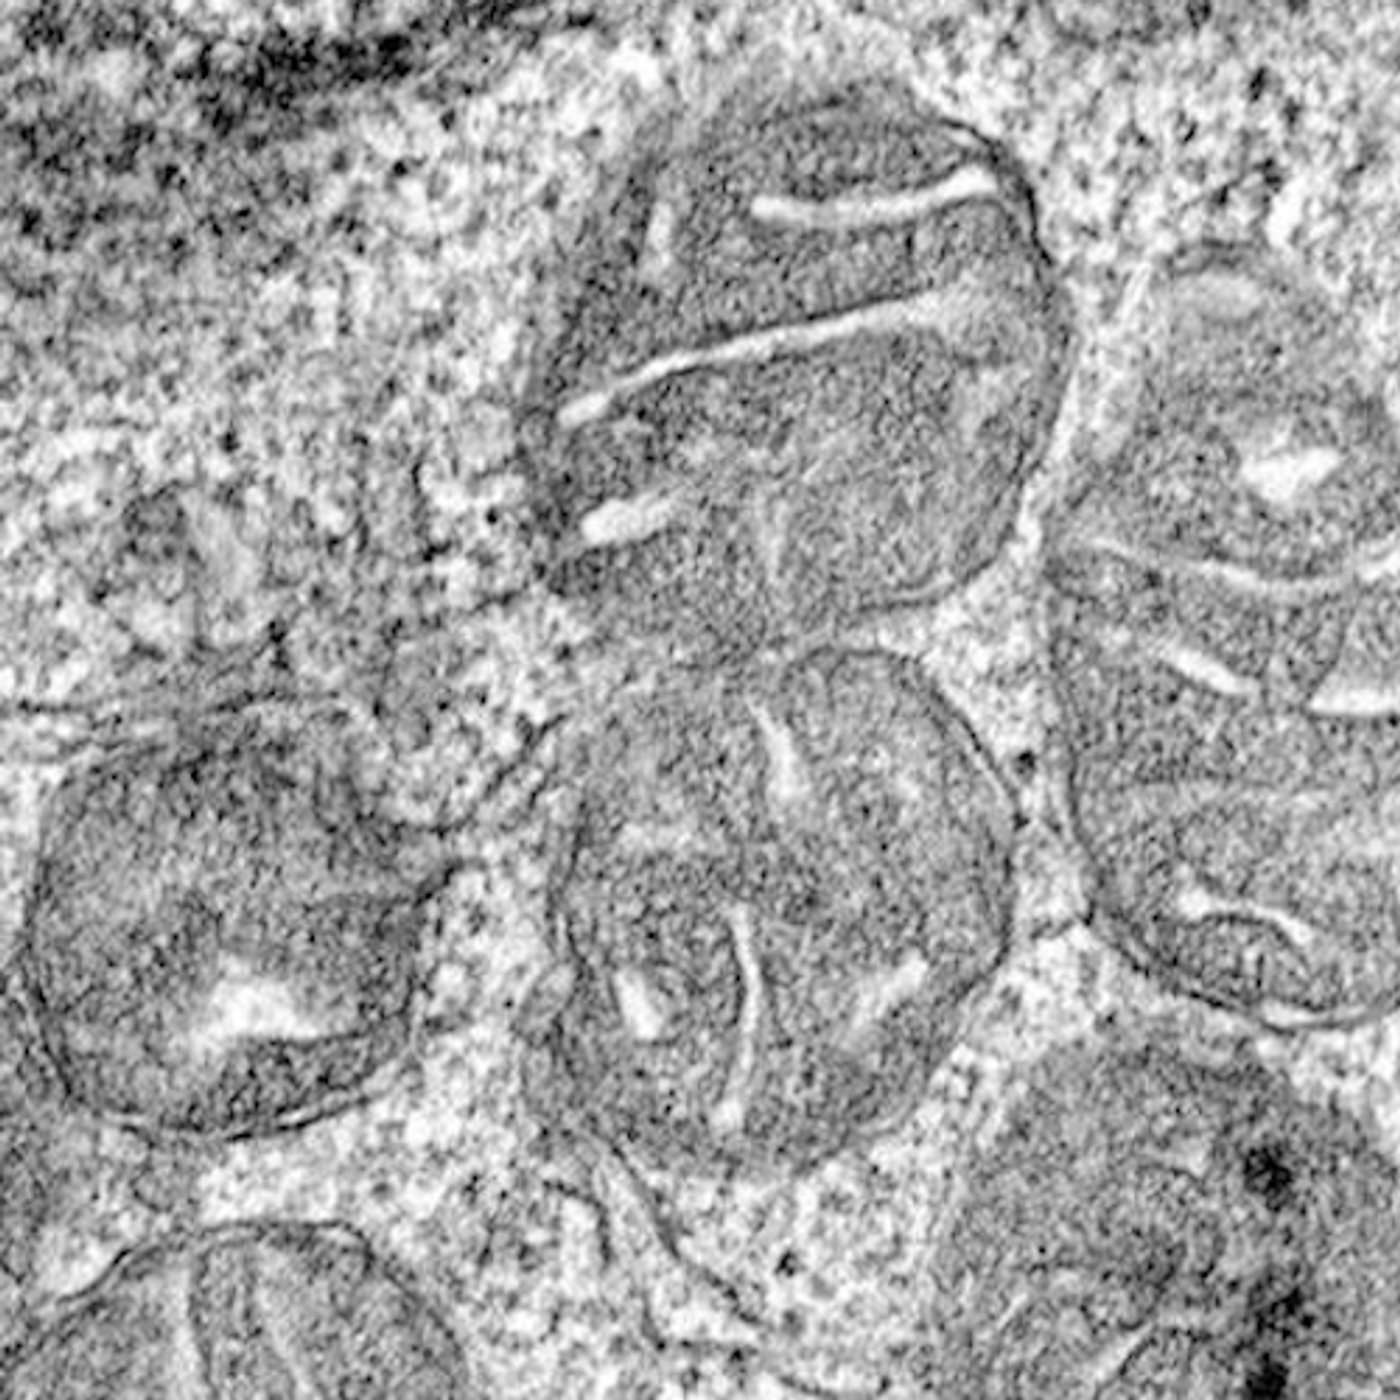 An electron microscope image showing the mitochondria (like the cell's batteries) inside an erythroid progenitor, the cell that divides to make red blood cells. This image was taken at 50,000x magnification -- 70 of these images lined up side-by-side would equal the diameter of a human hair. / Credit: Courtesy Goldfarb lab, University of Virginia School of Medicine